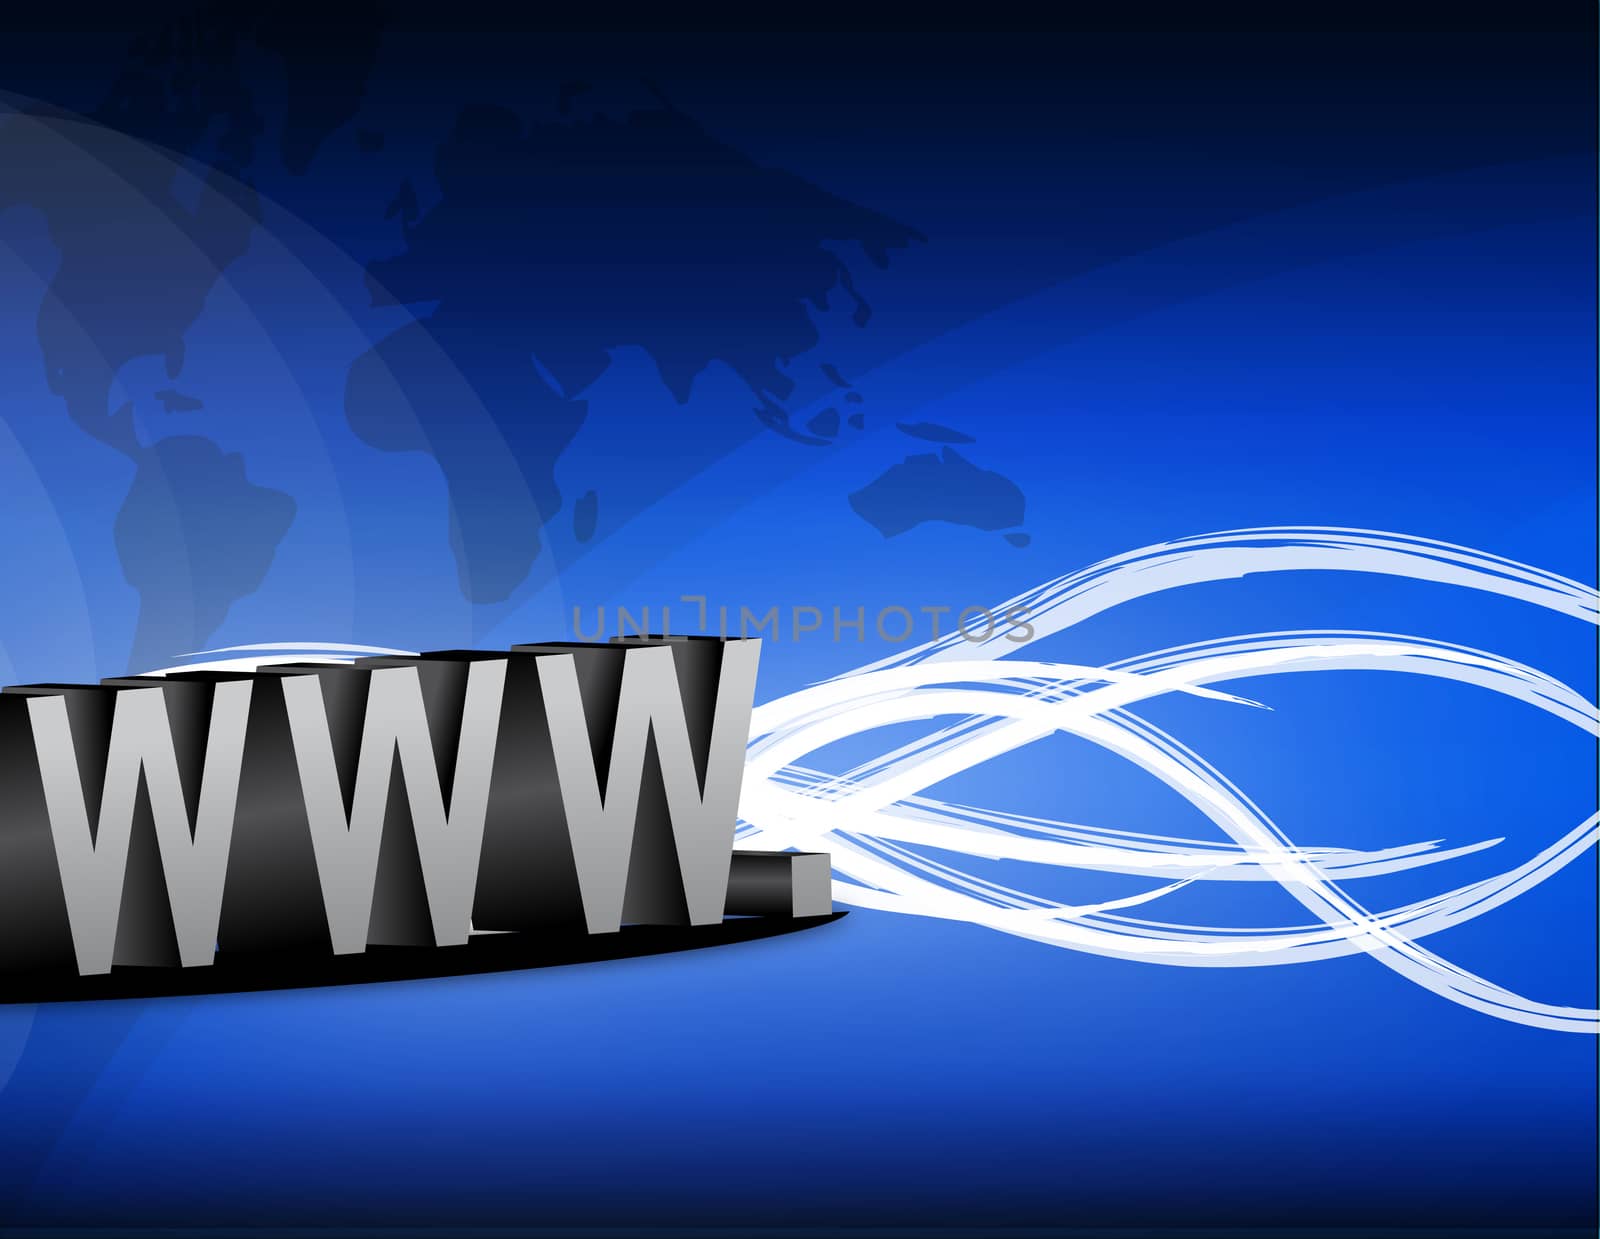 www Internet and wires background